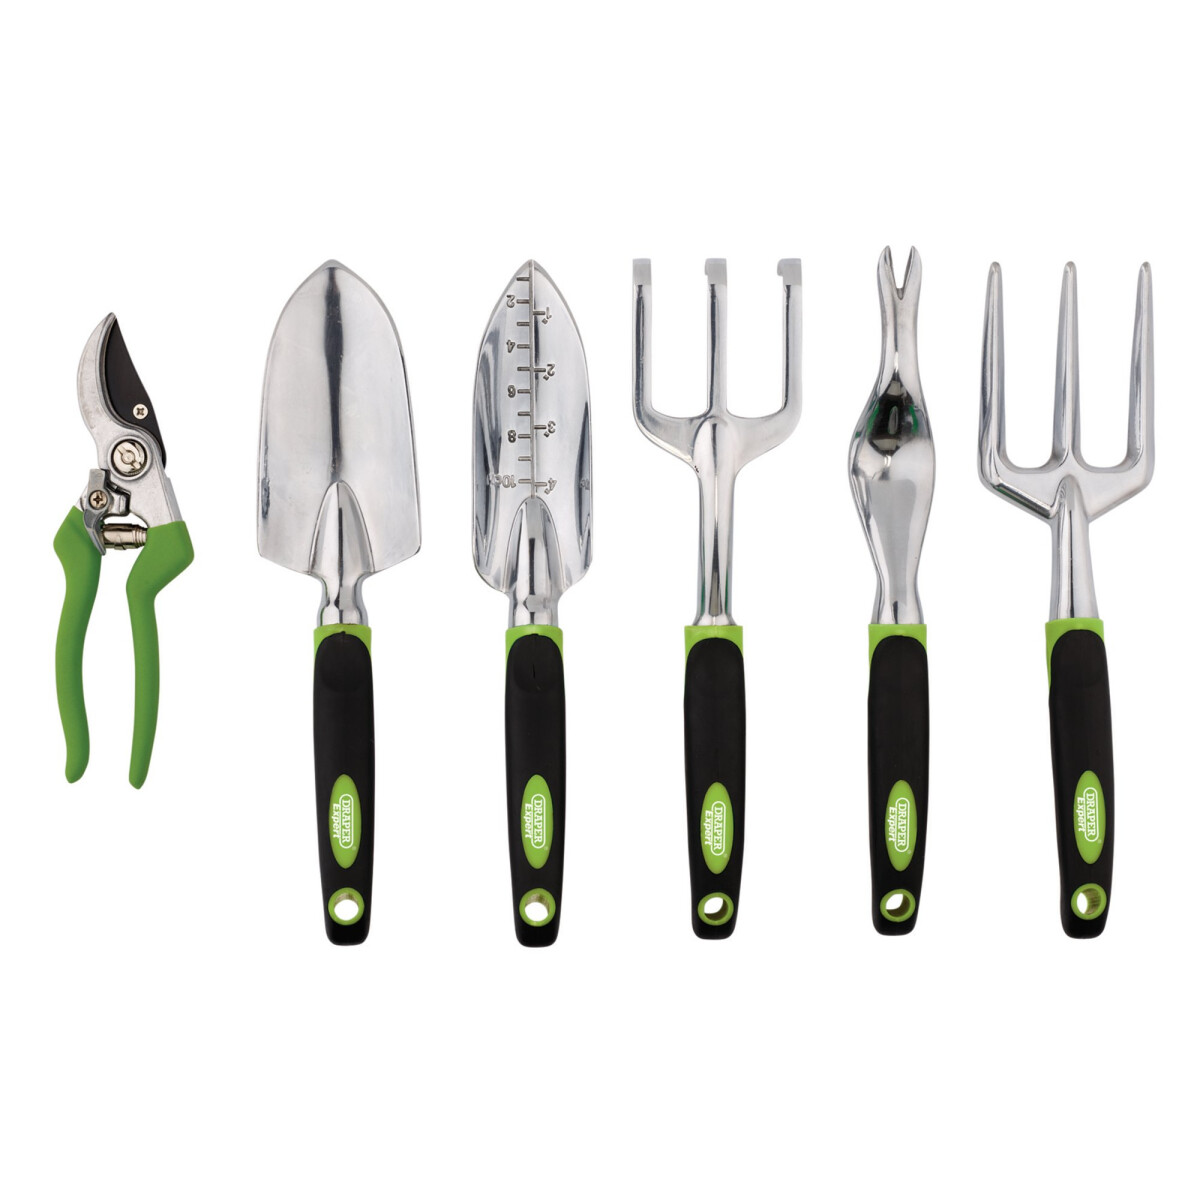 Draper 08996 AGTS/5 Garden Tool Set (6 Piece) from Lawson HIS